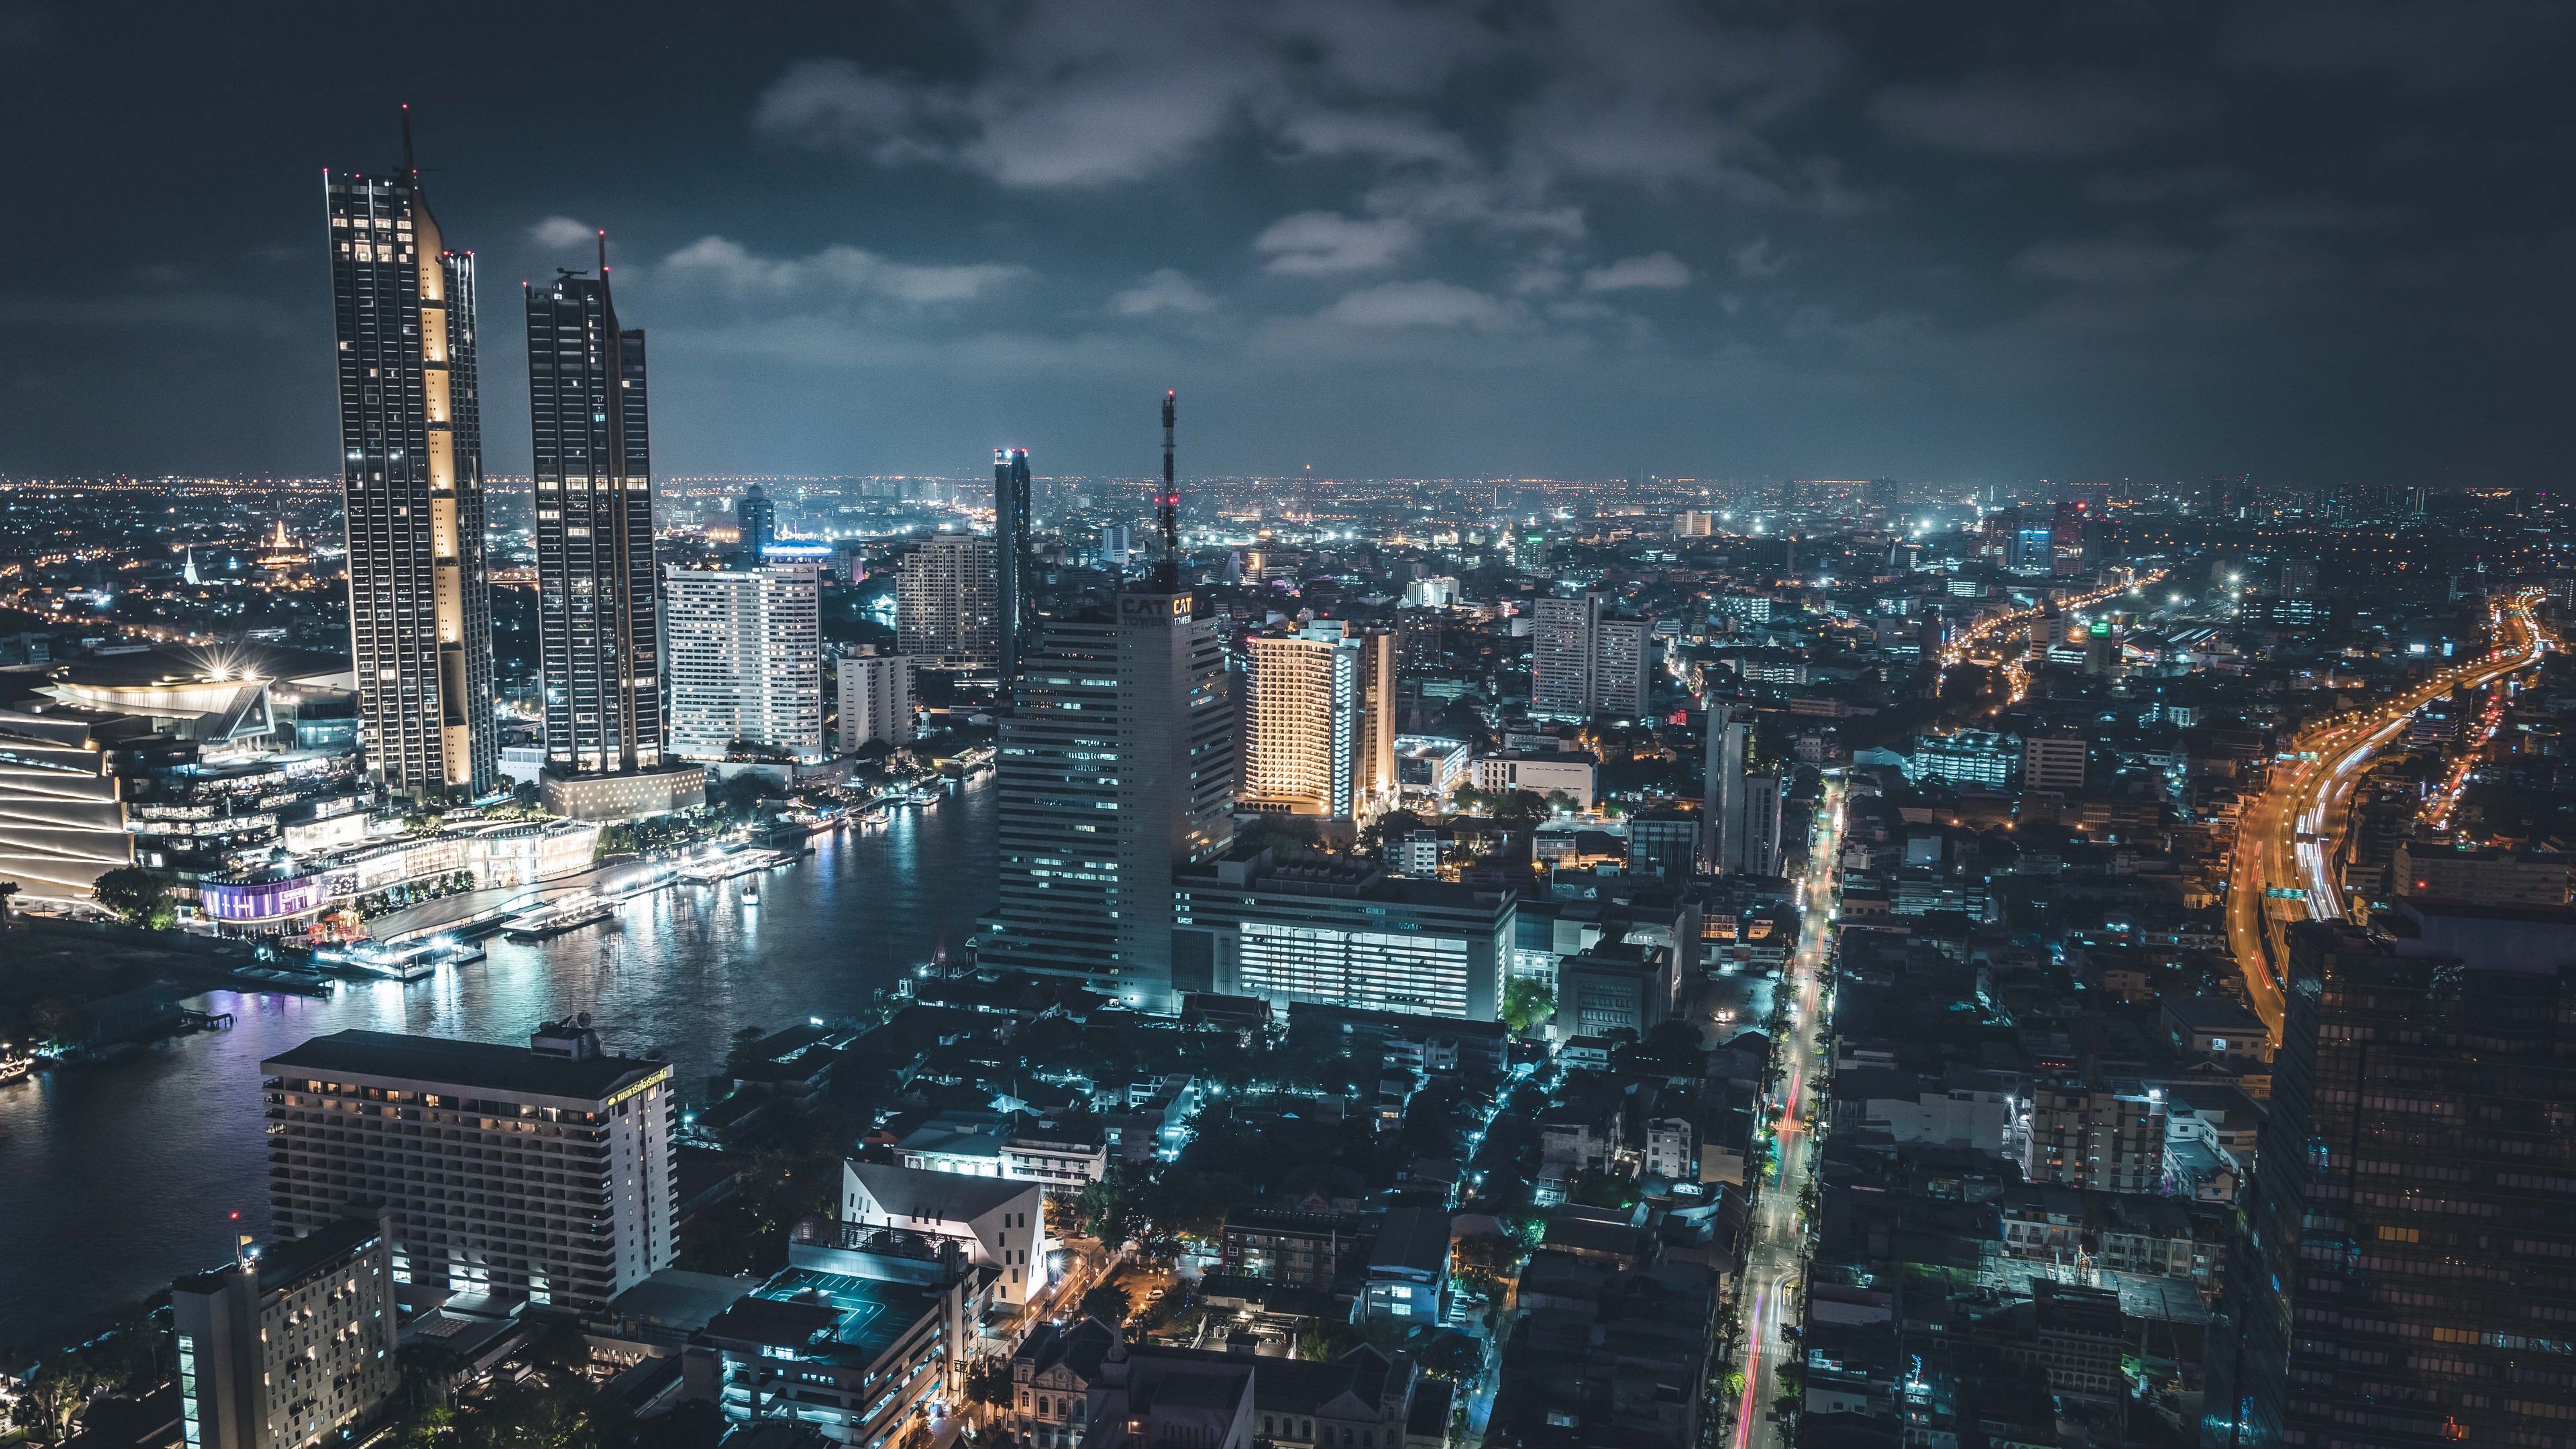 Download wallpaper 3840x2160 night city, aerial view, buildings, lights,  architecture, bangkok 4k uhd 16:9 hd background